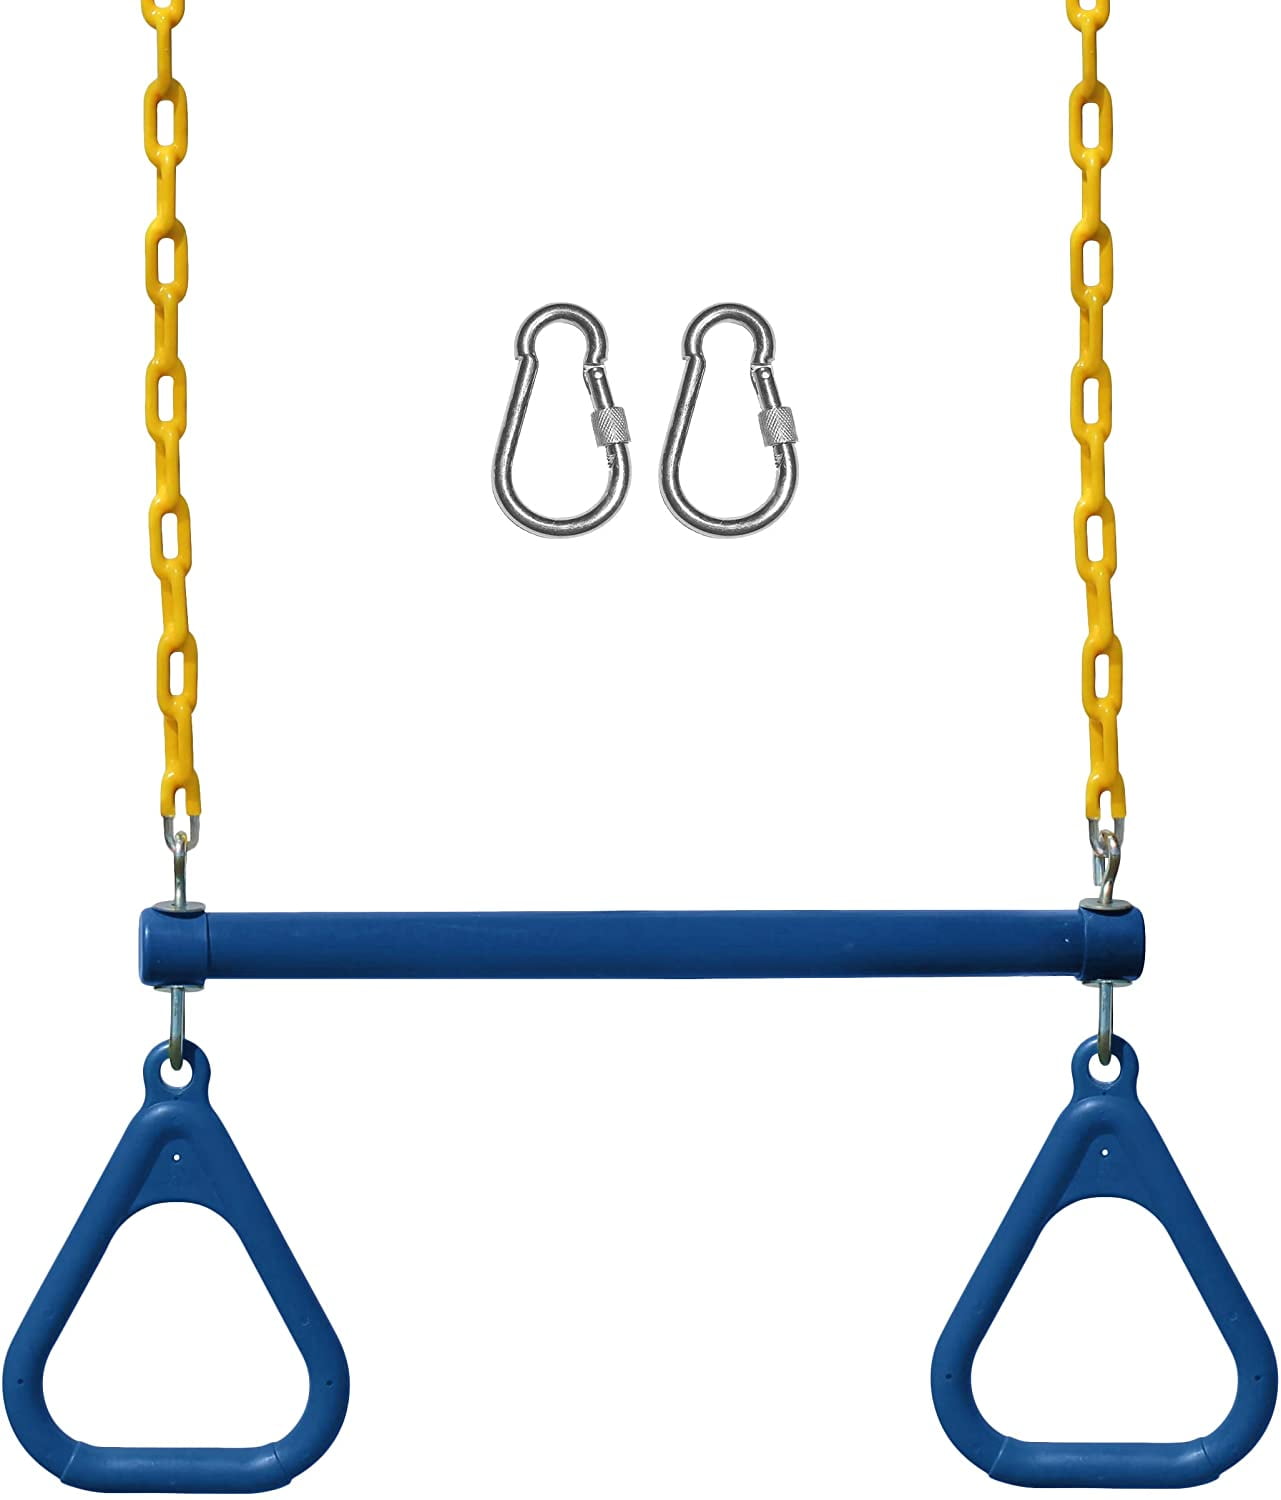 AIIAJJE Trapeze bar for Kids Trapeze Swing bar with Rings& Locking Carabiners for Indoor Jungle Gym Play Set and Outdoor Playground for Swingset Ninja line Backyard 